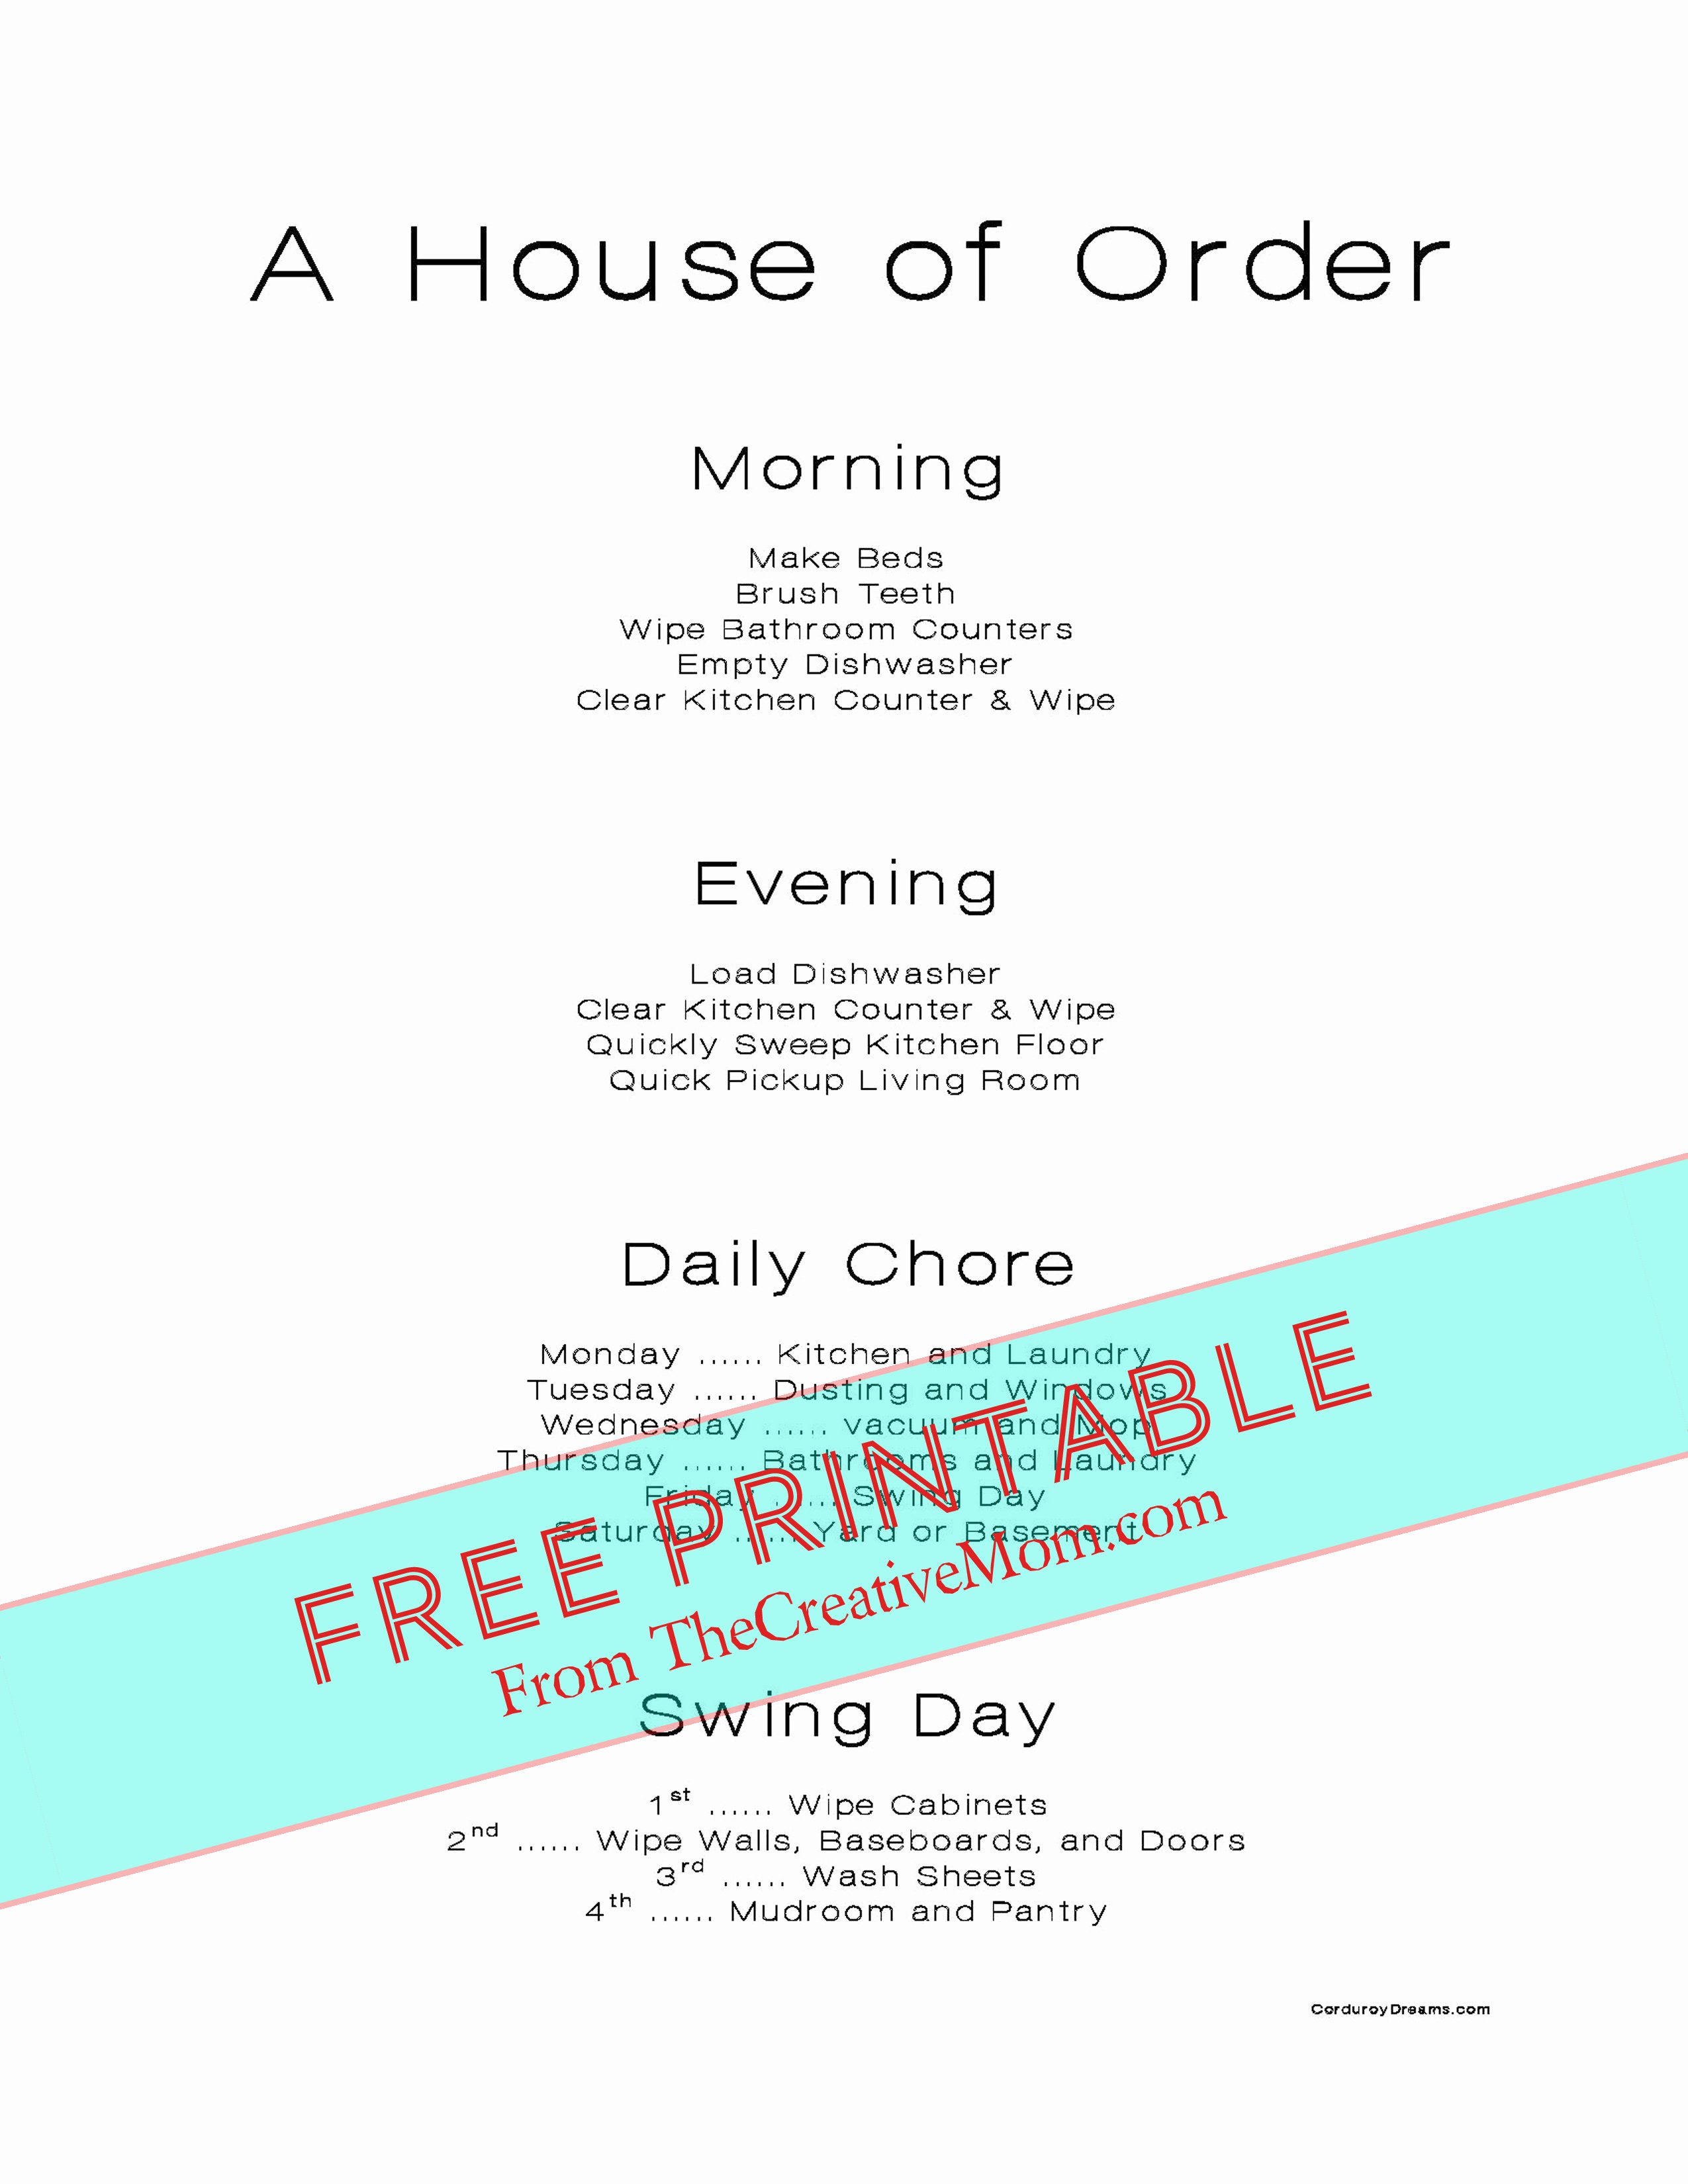 Chore Charts for Adults Lovely Printables Archives Page 2 Of 3 the Creative Mom